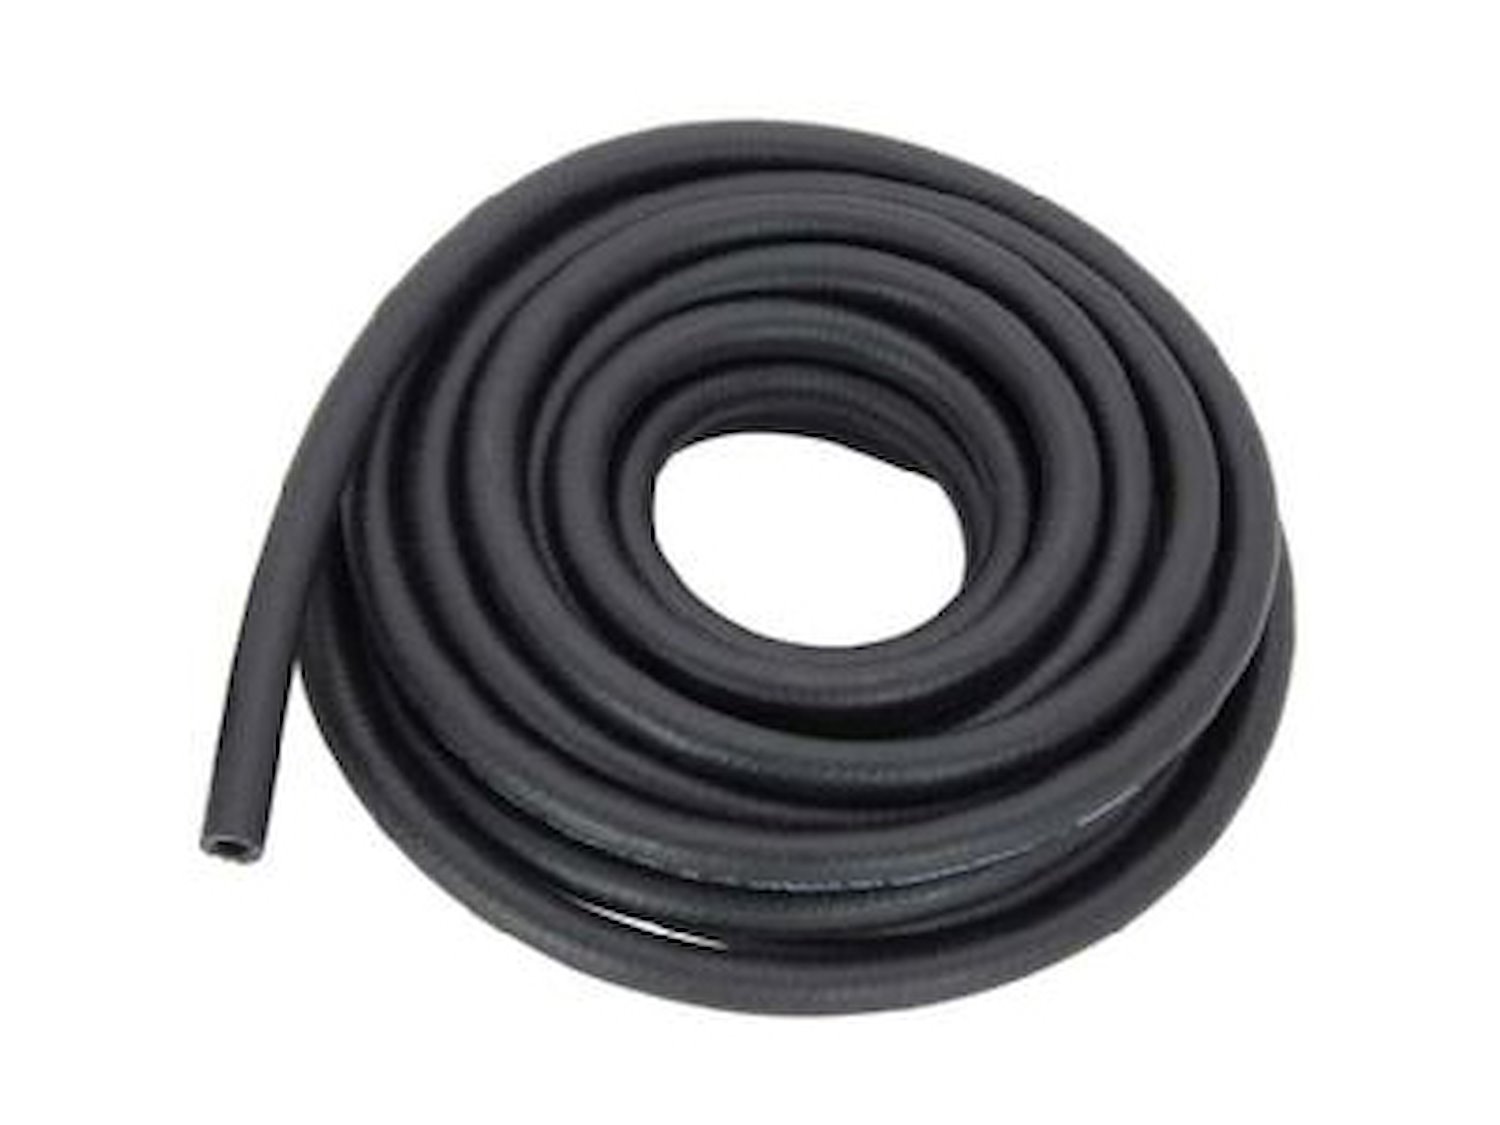 Universal Fuel Hose [5/16 in. I.D. x 25